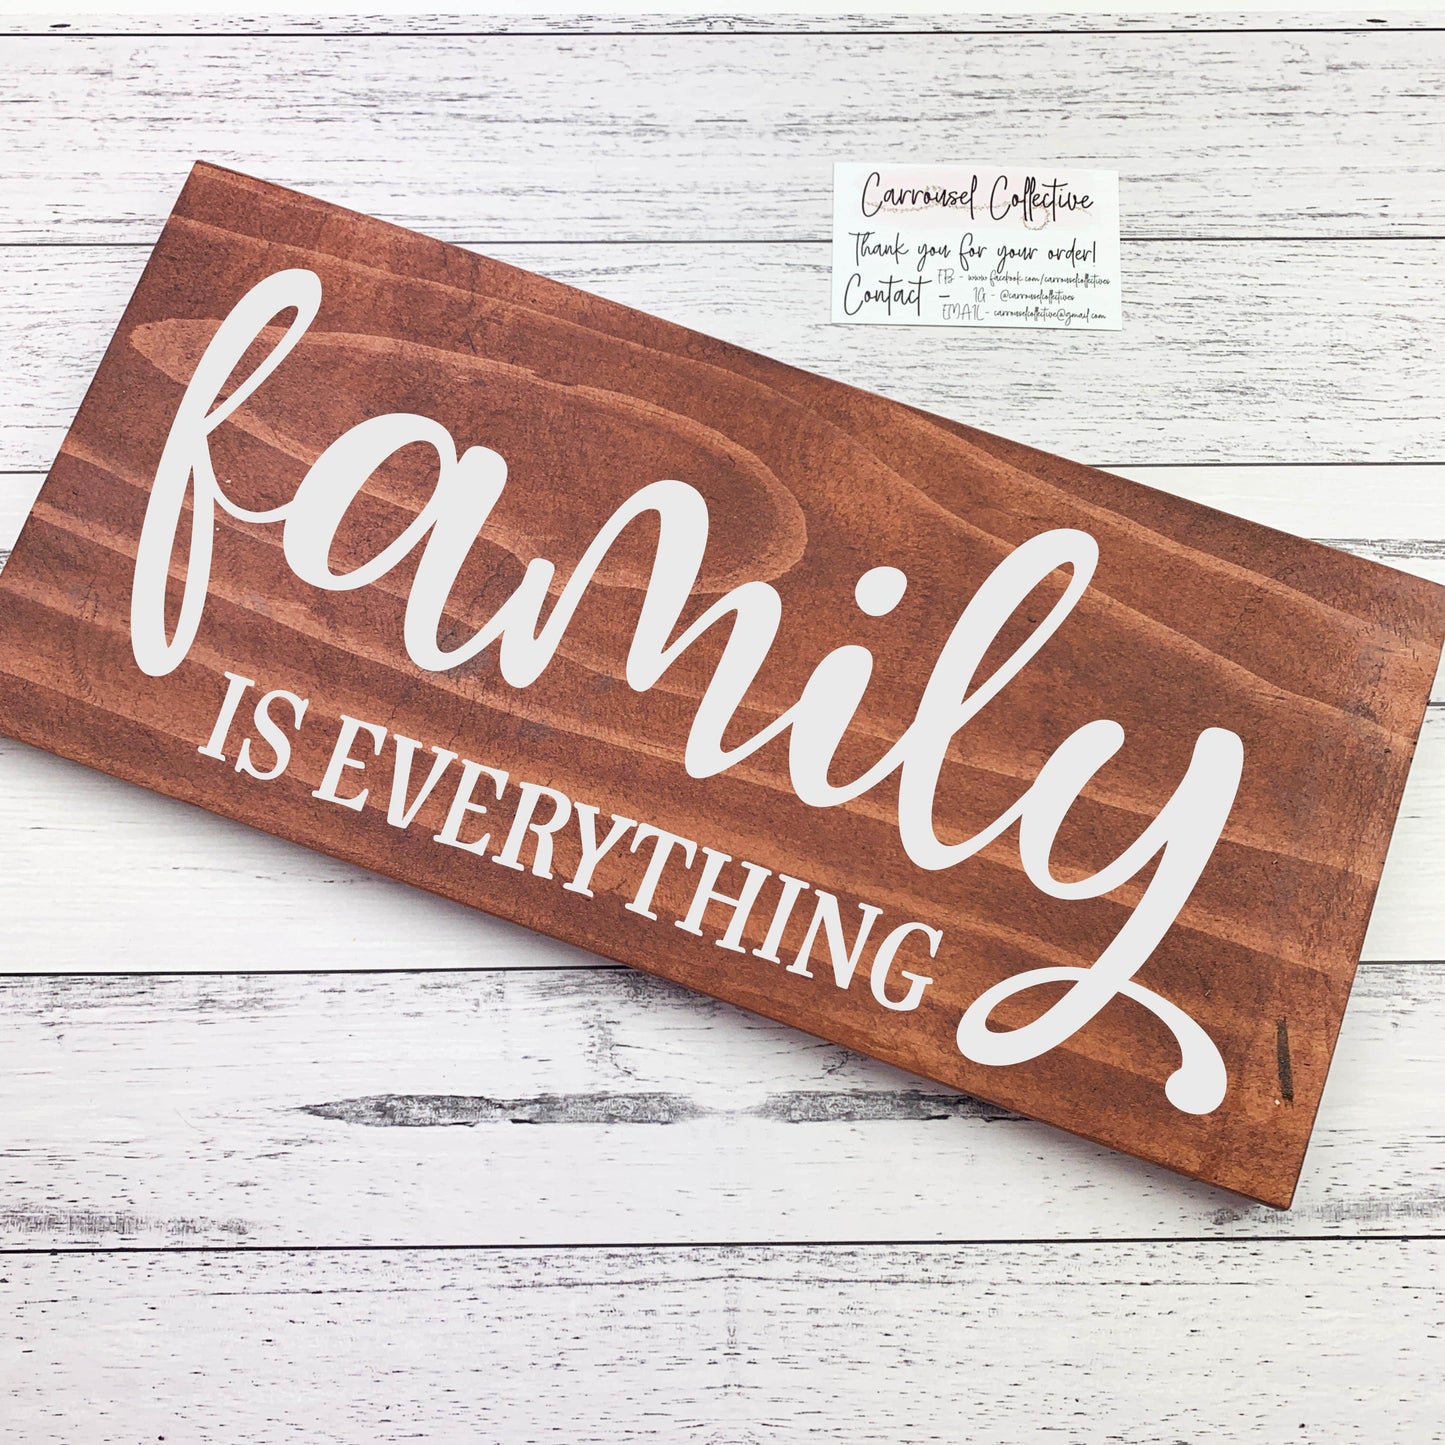 Family is Everything wood sign, quote sign, rustic decor, home decor